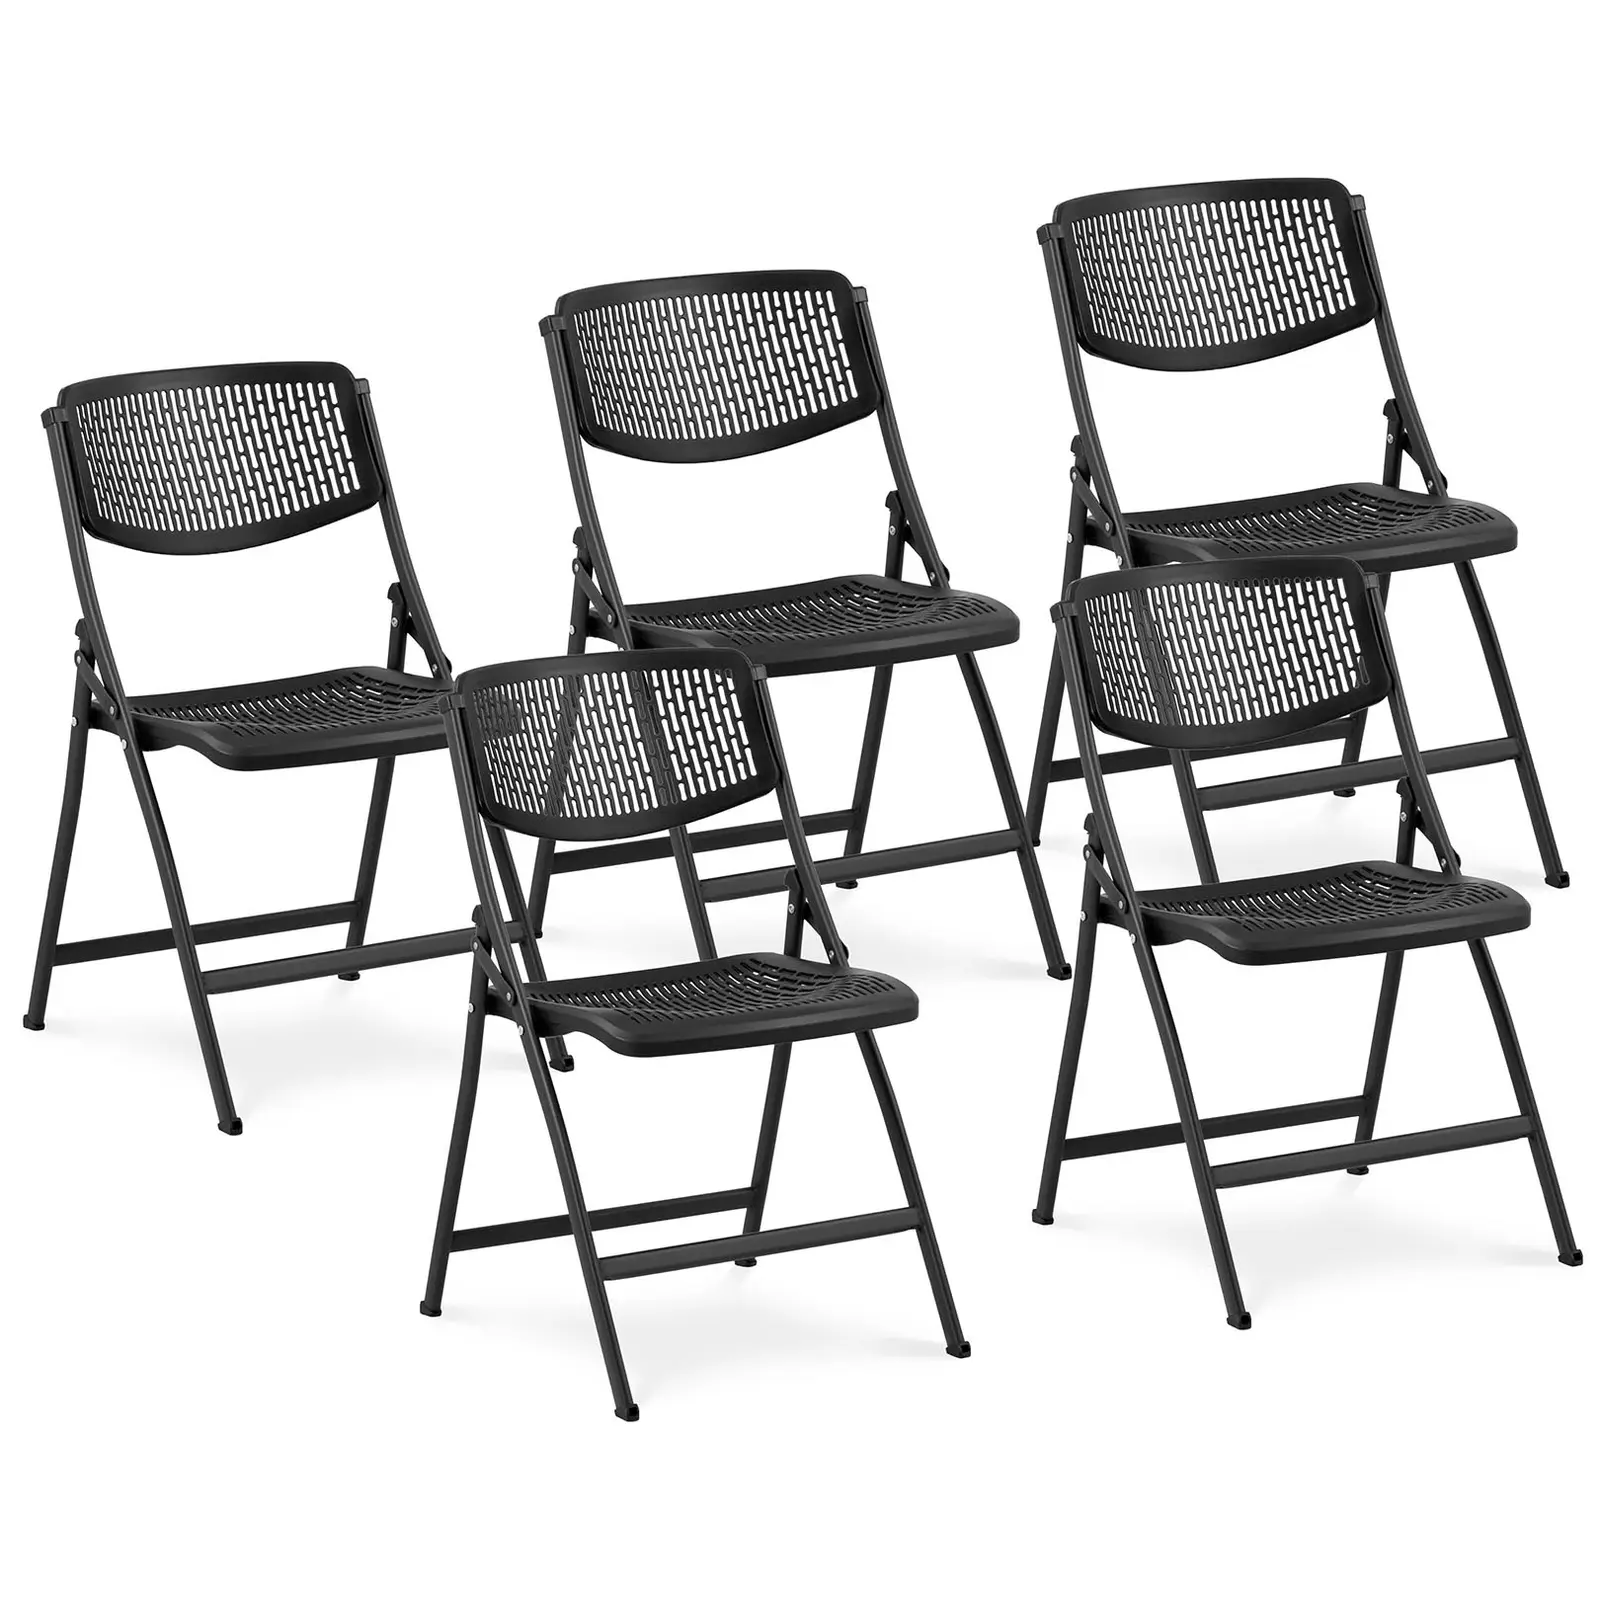 Chairs - set of 5 - up to 150 kg - seat area  430x430x440 mm - {{colour_34_old_temp}}